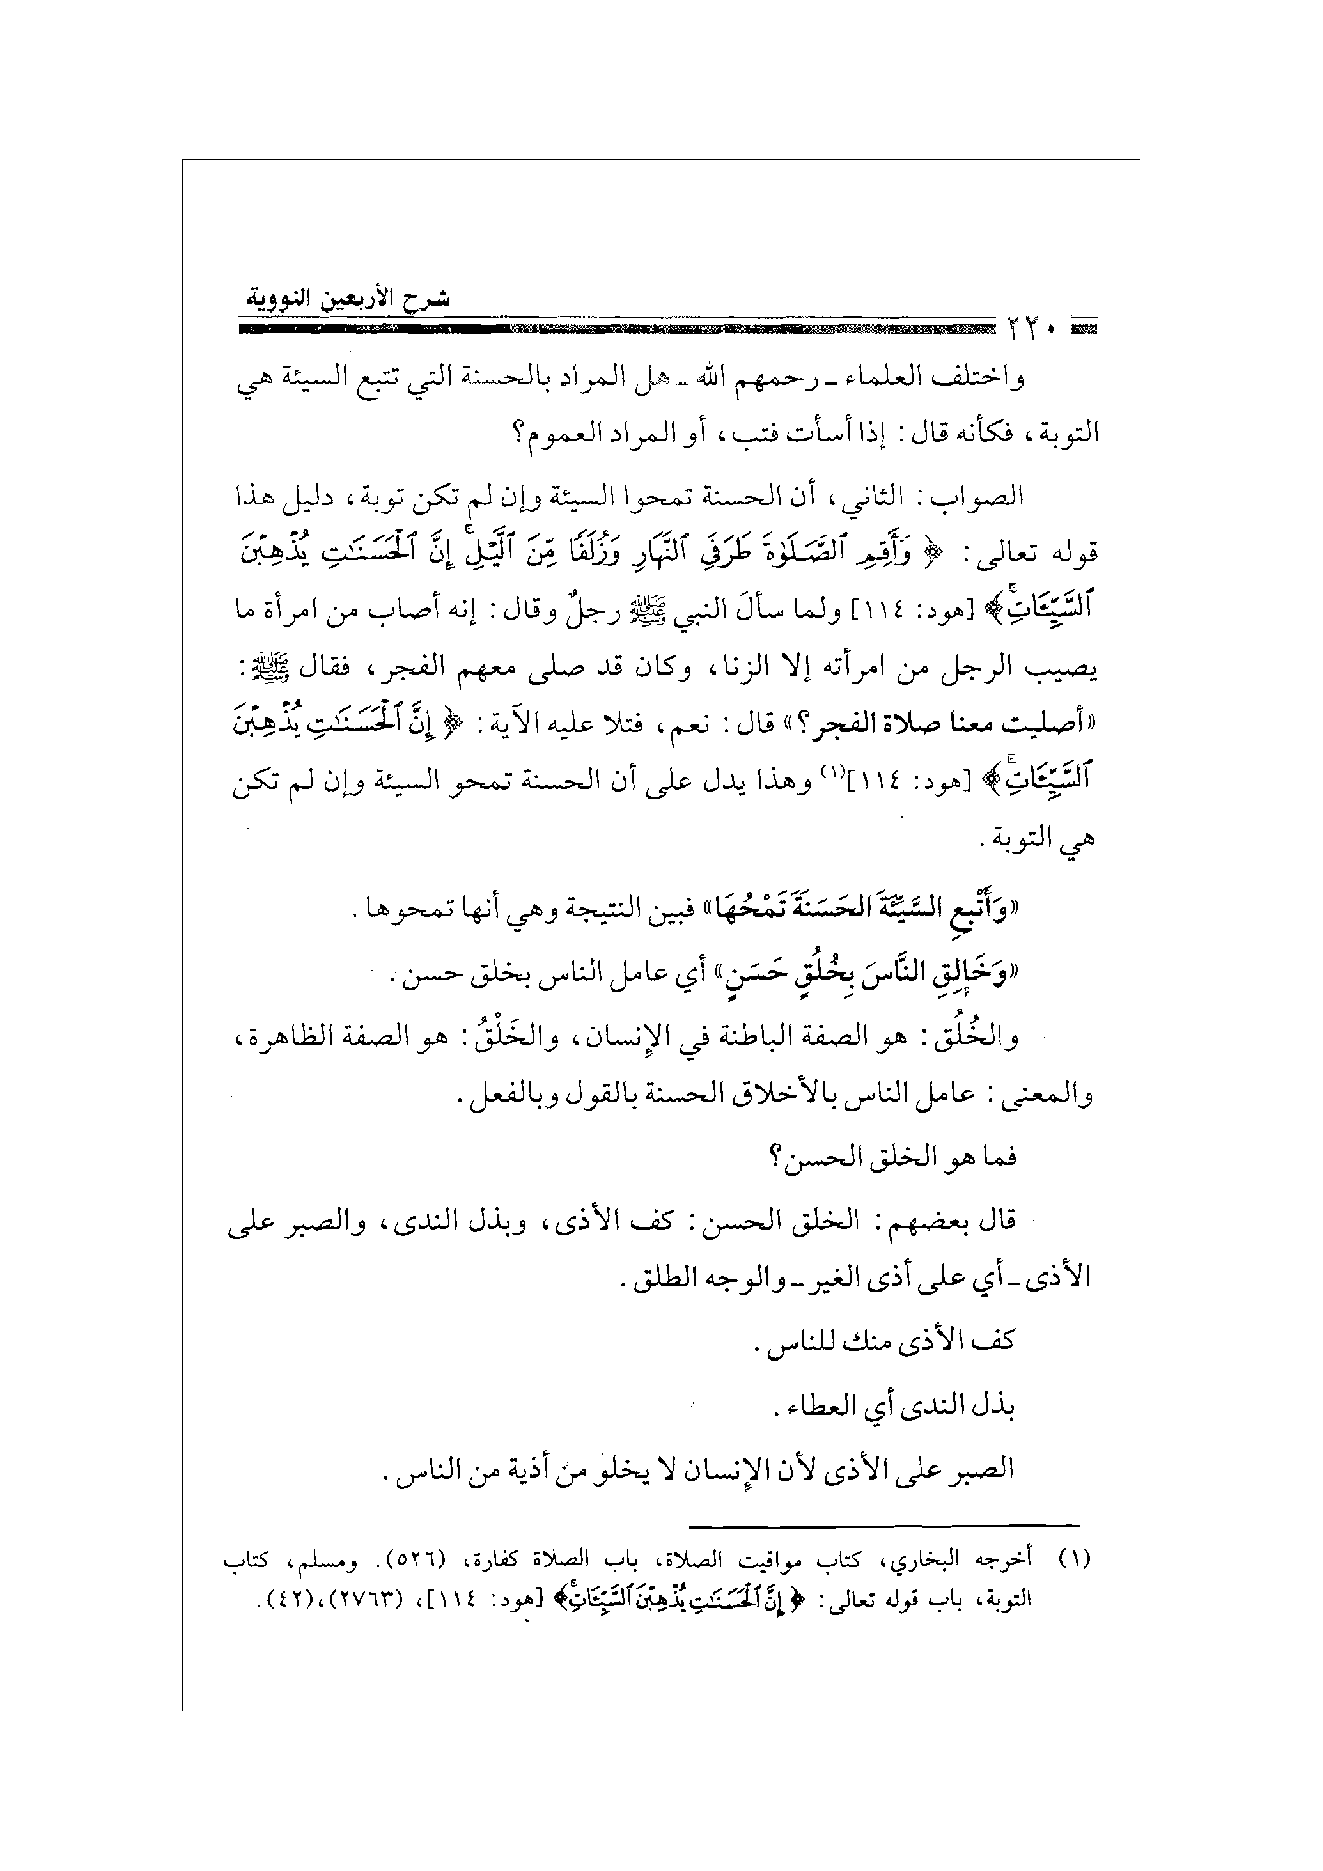 Page 220